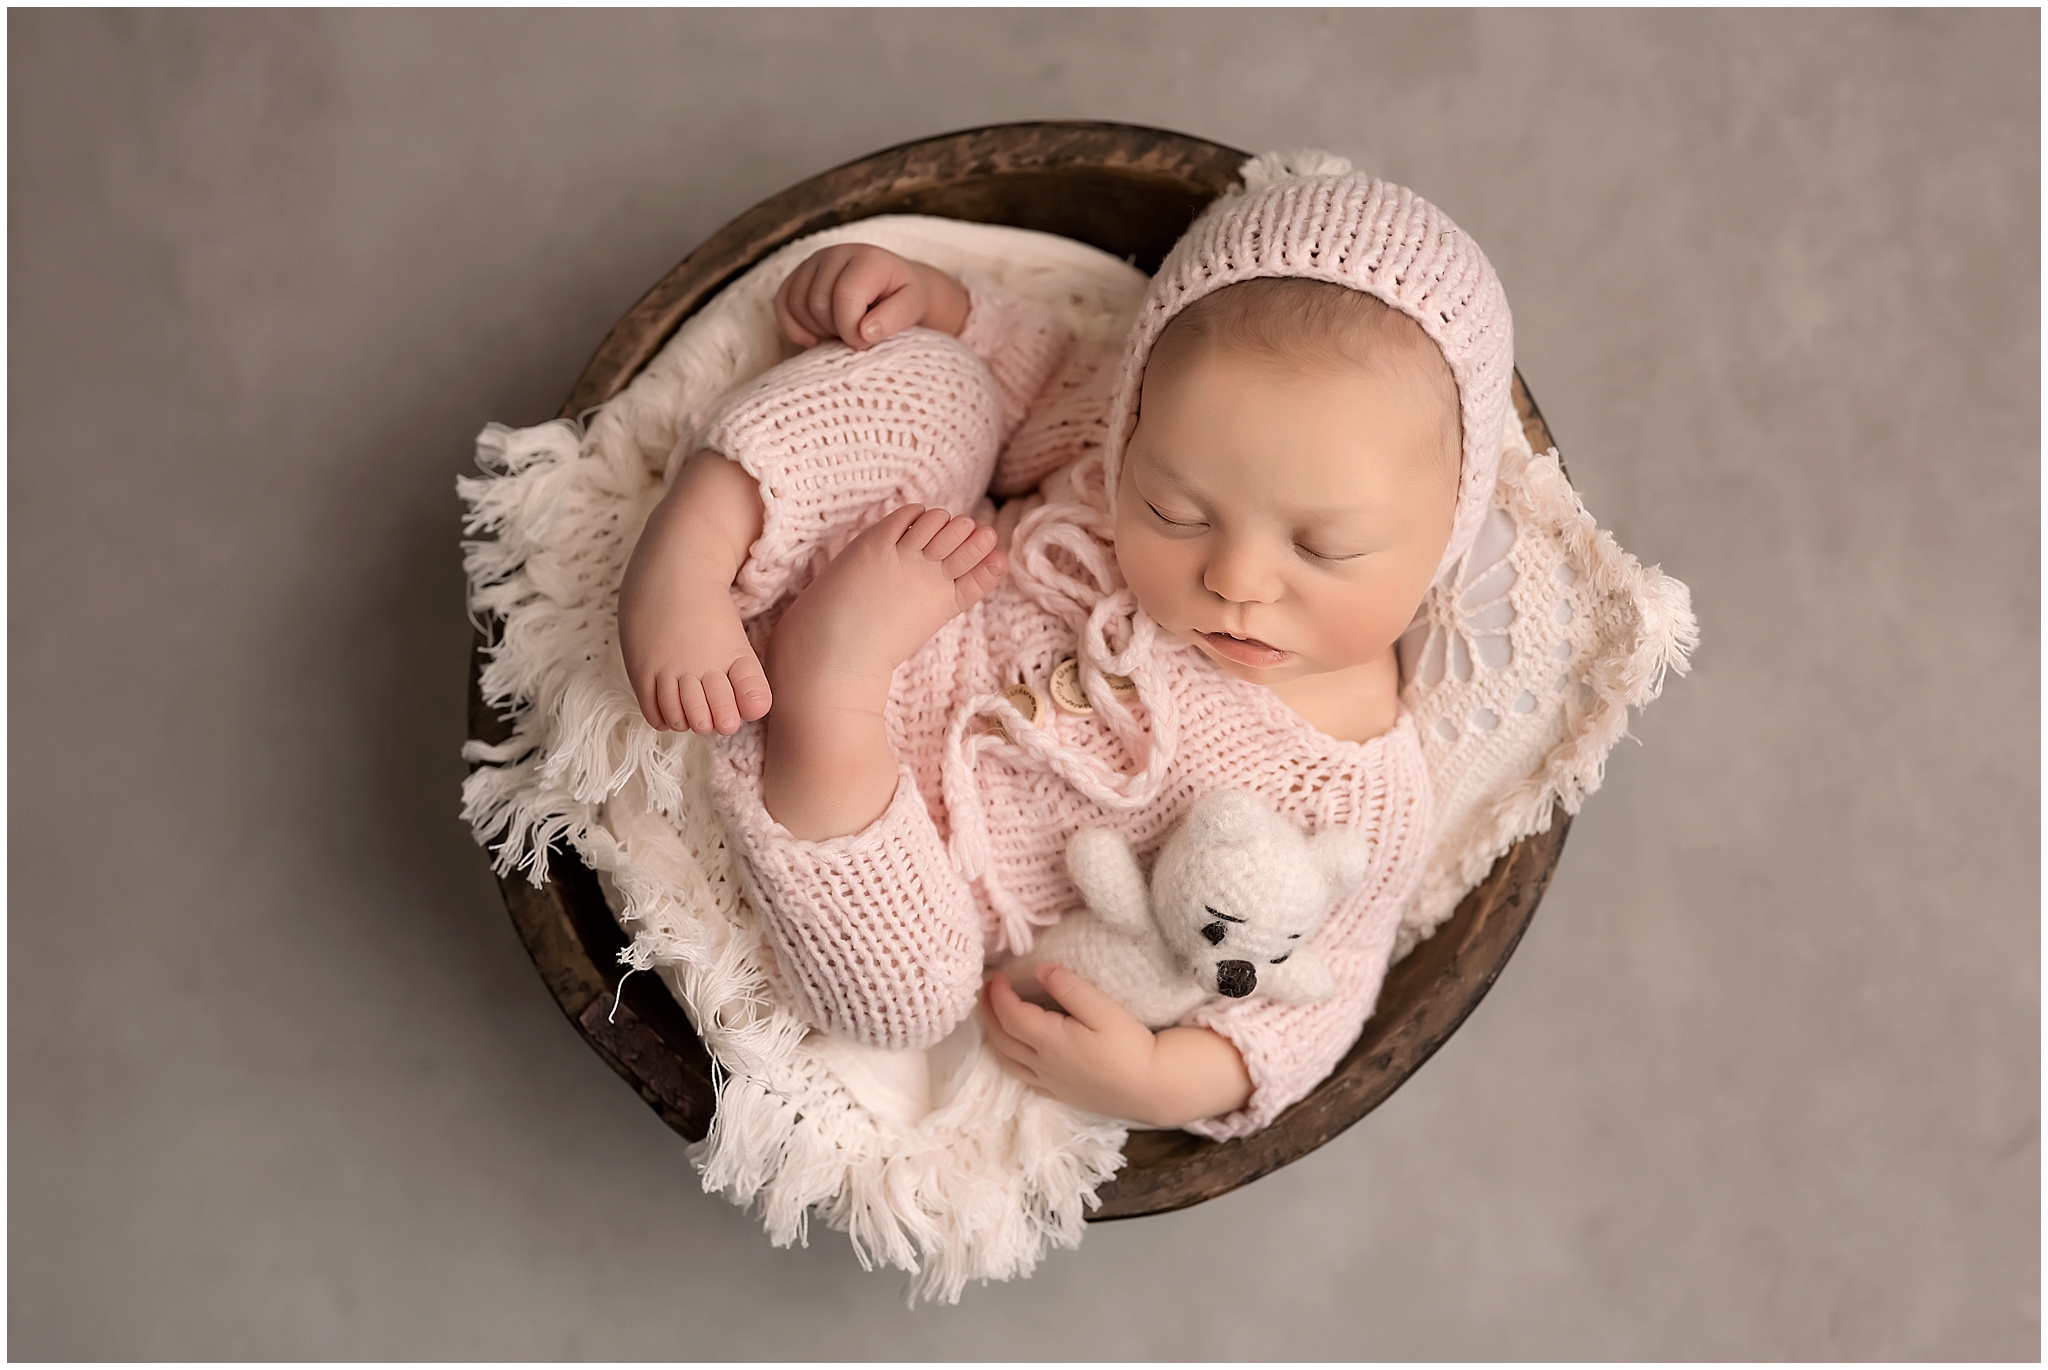 baby sleeping in bowl holding teddy bear during newborn photography session in london ontario